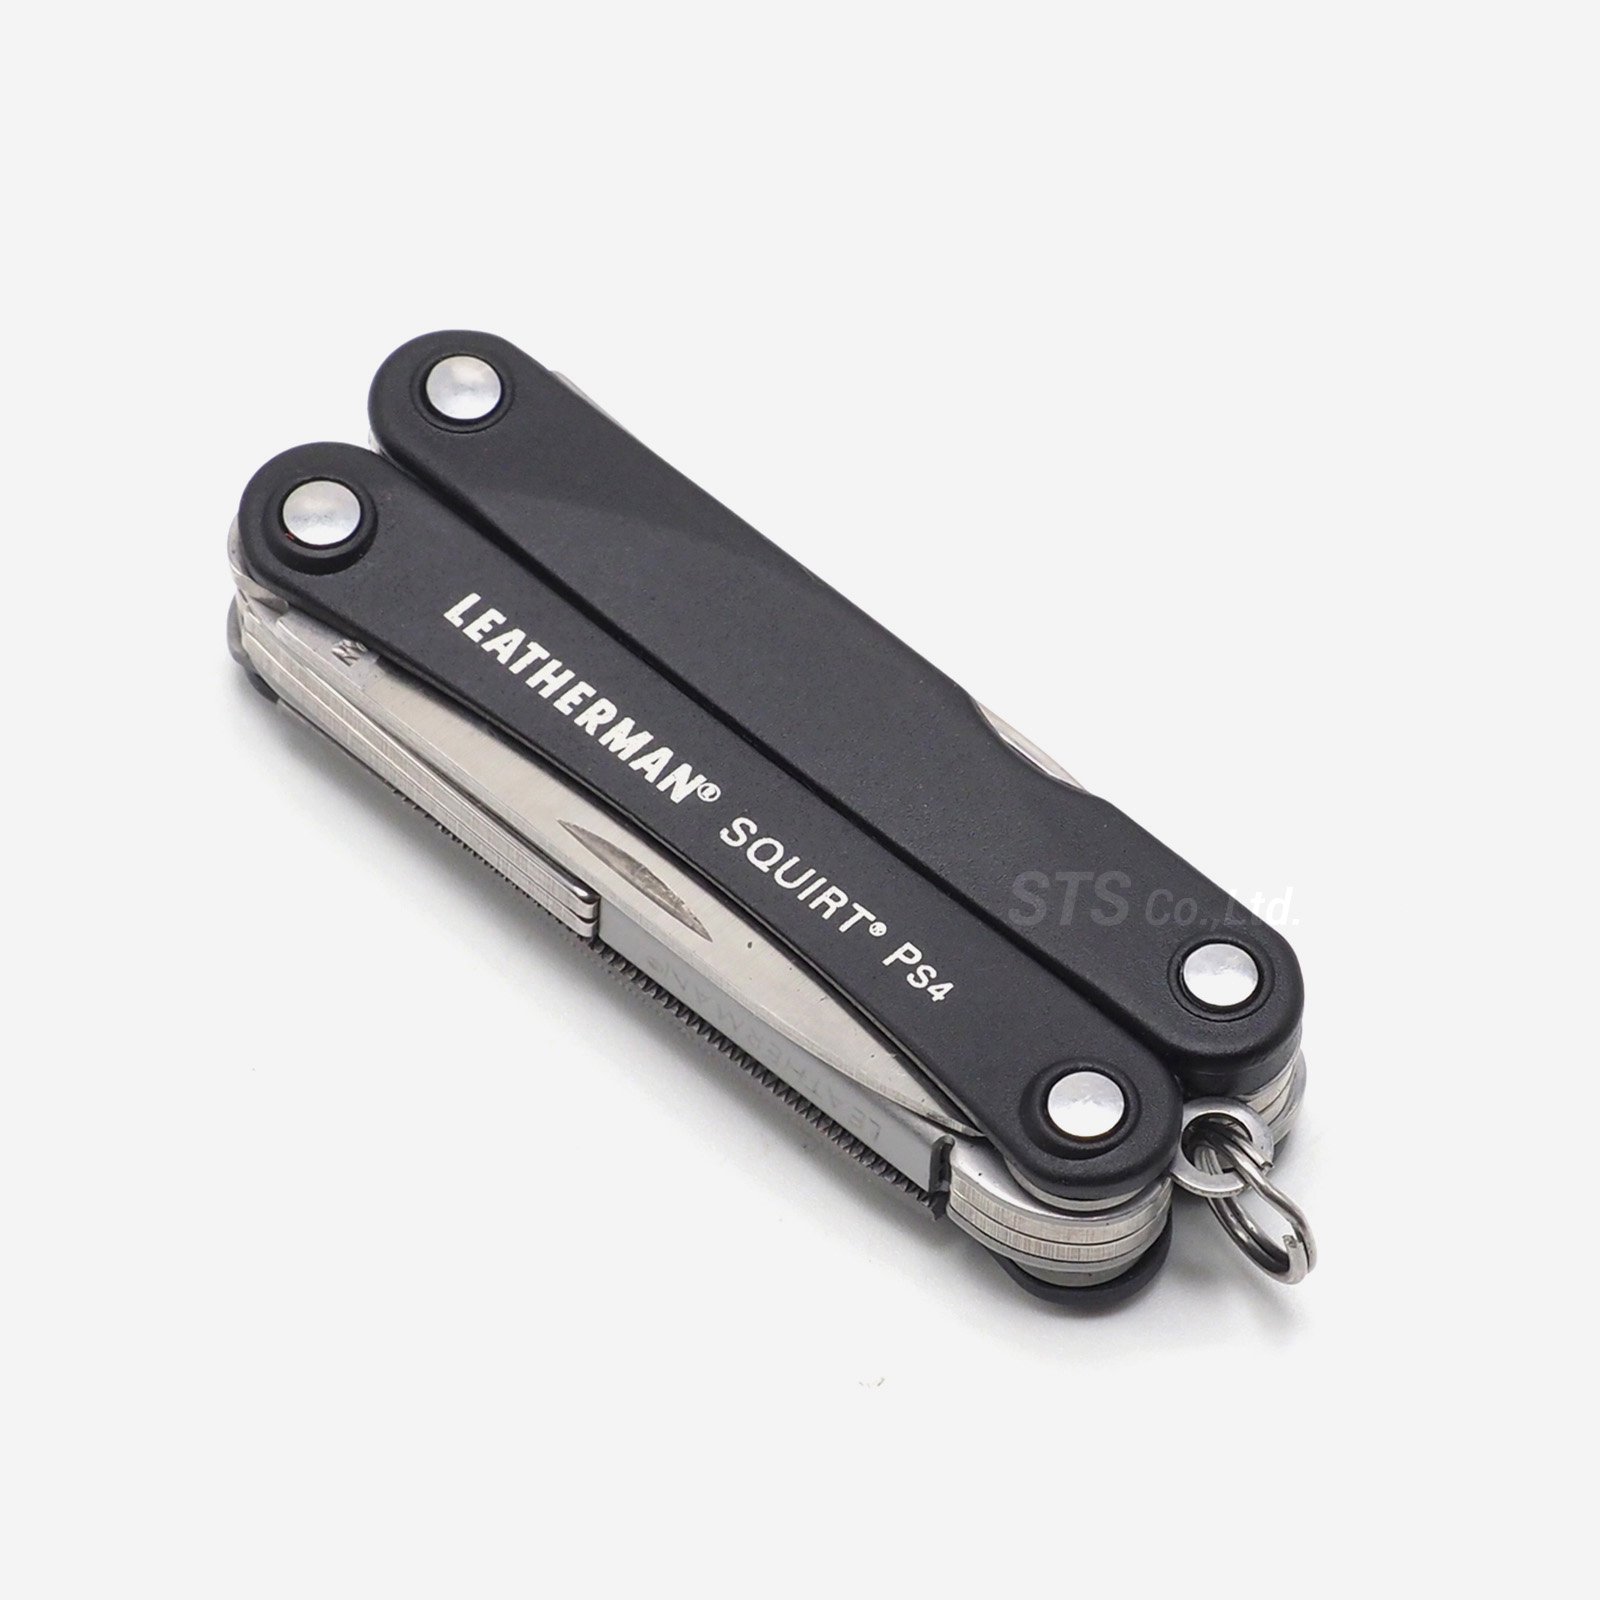 Supreme/Leatherman Squirt PS4 Multitool - ParkSIDER